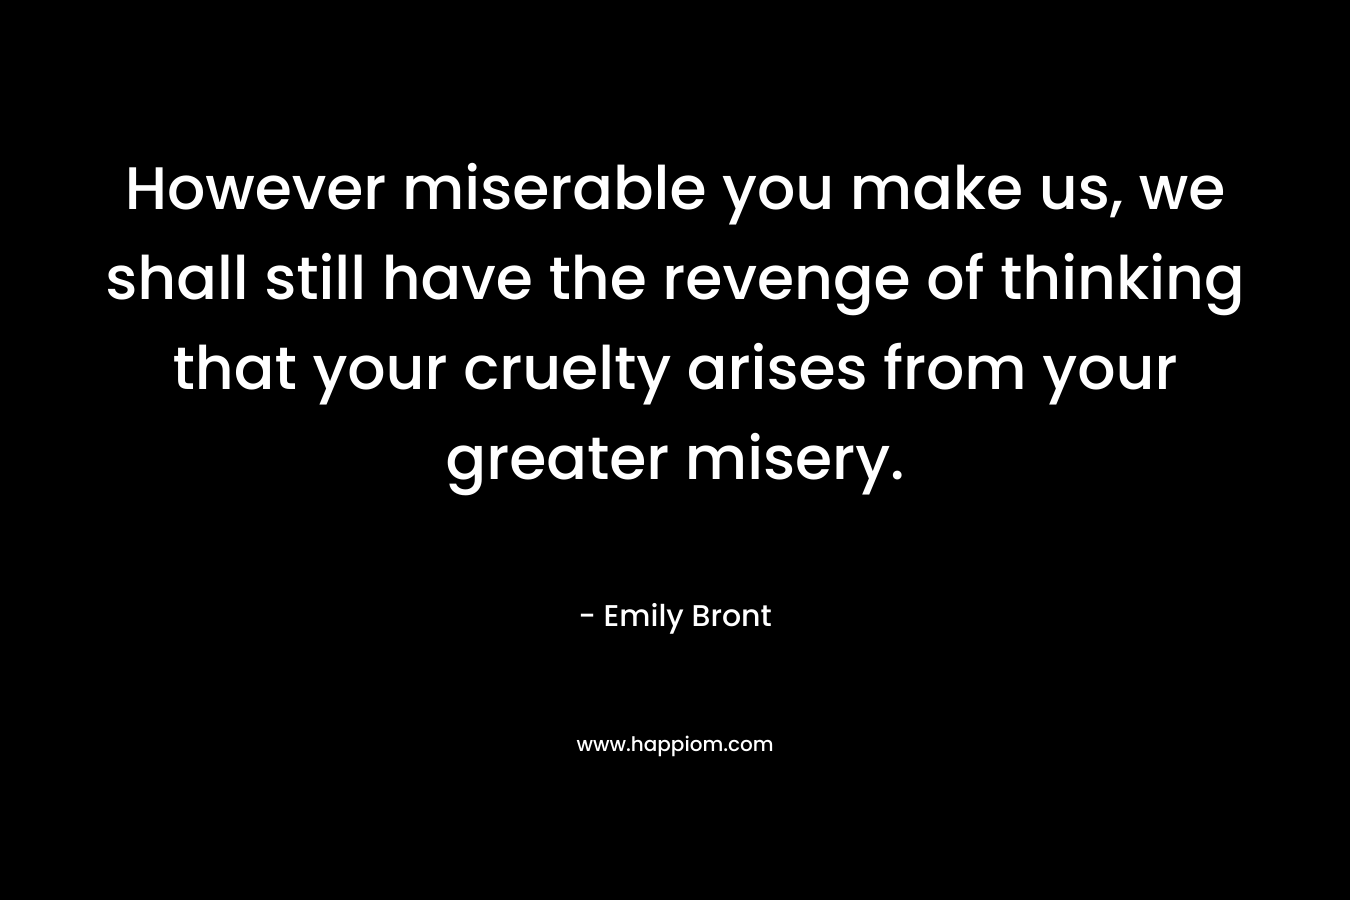 However miserable you make us, we shall still have the revenge of thinking that your cruelty arises from your greater misery. – Emily Bront